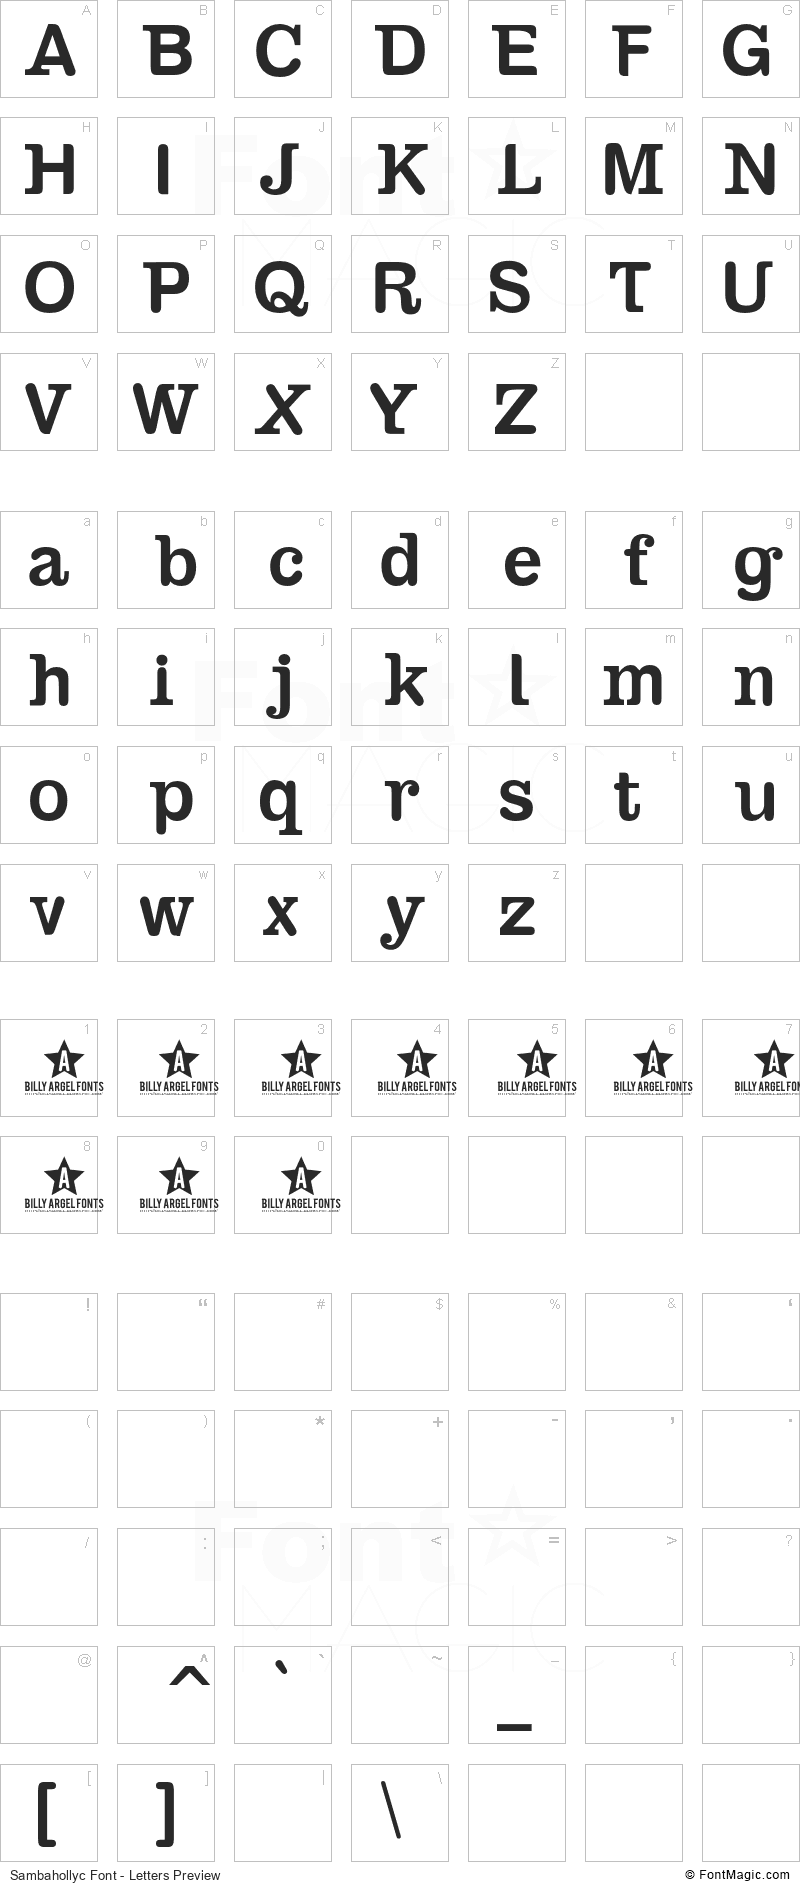 Sambahollyc Font - All Latters Preview Chart